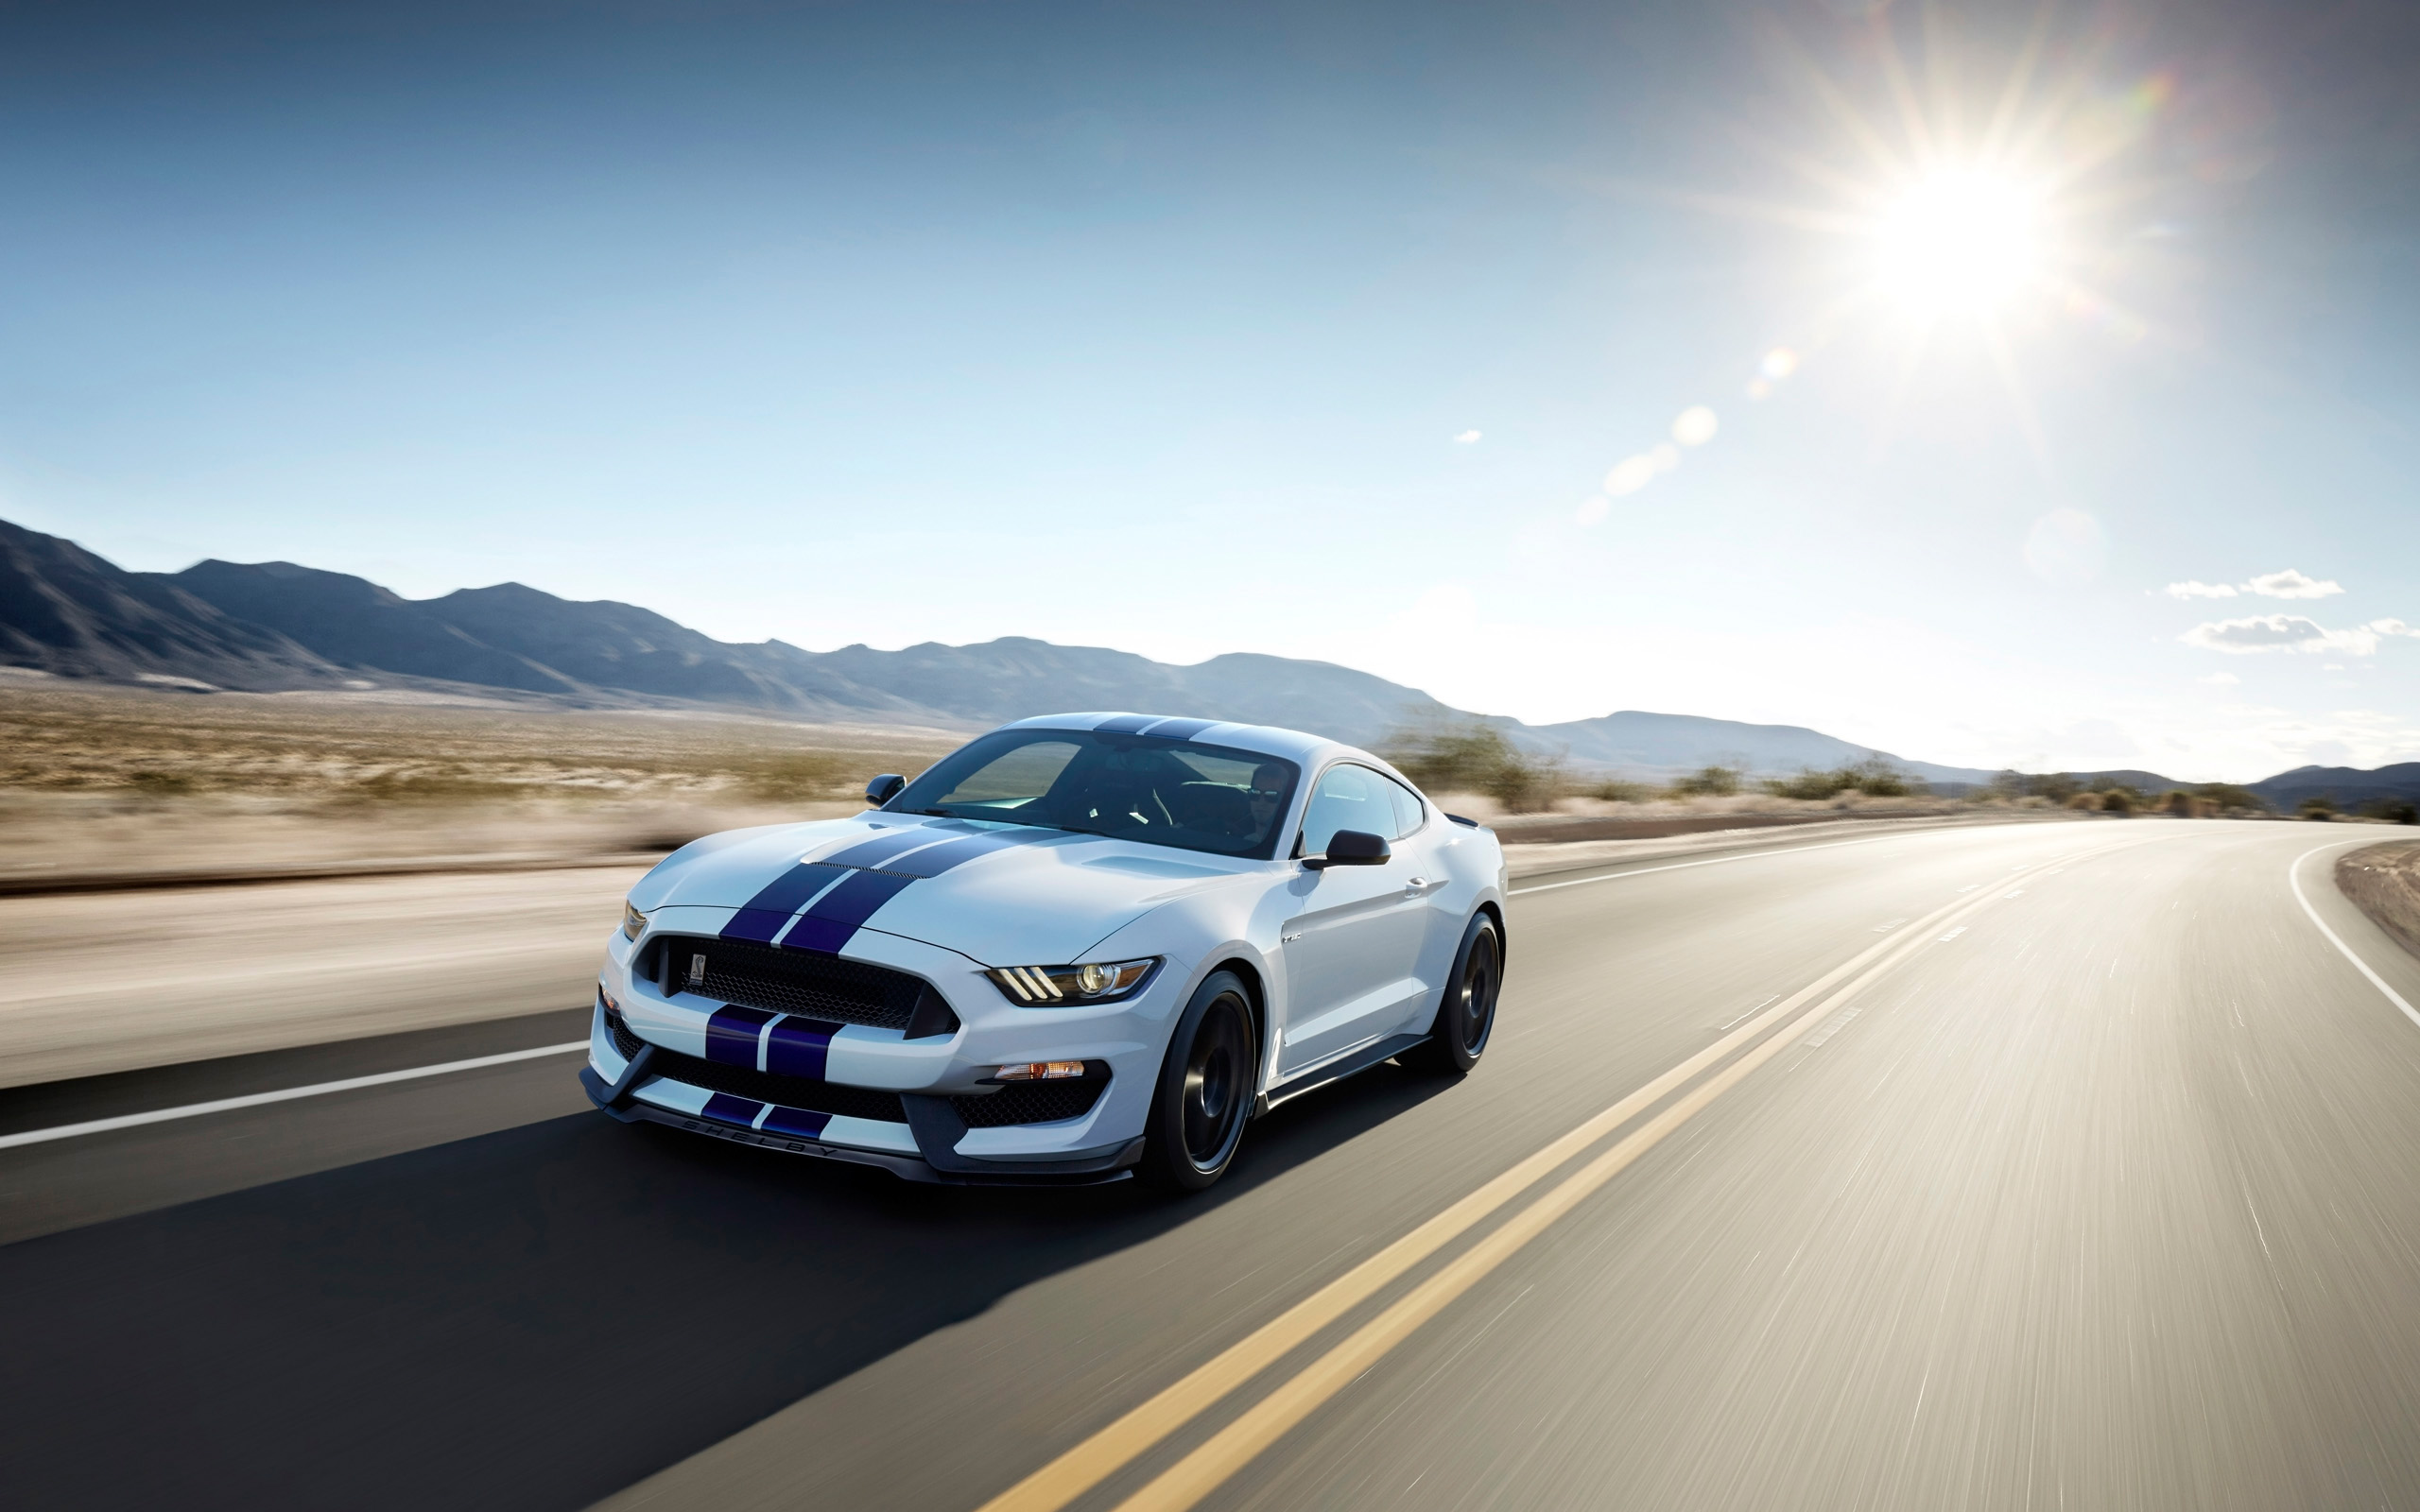 2015 Ford Shelby GT350 Mustang Wallpaper | HD Car Wallpapers | ID #4957